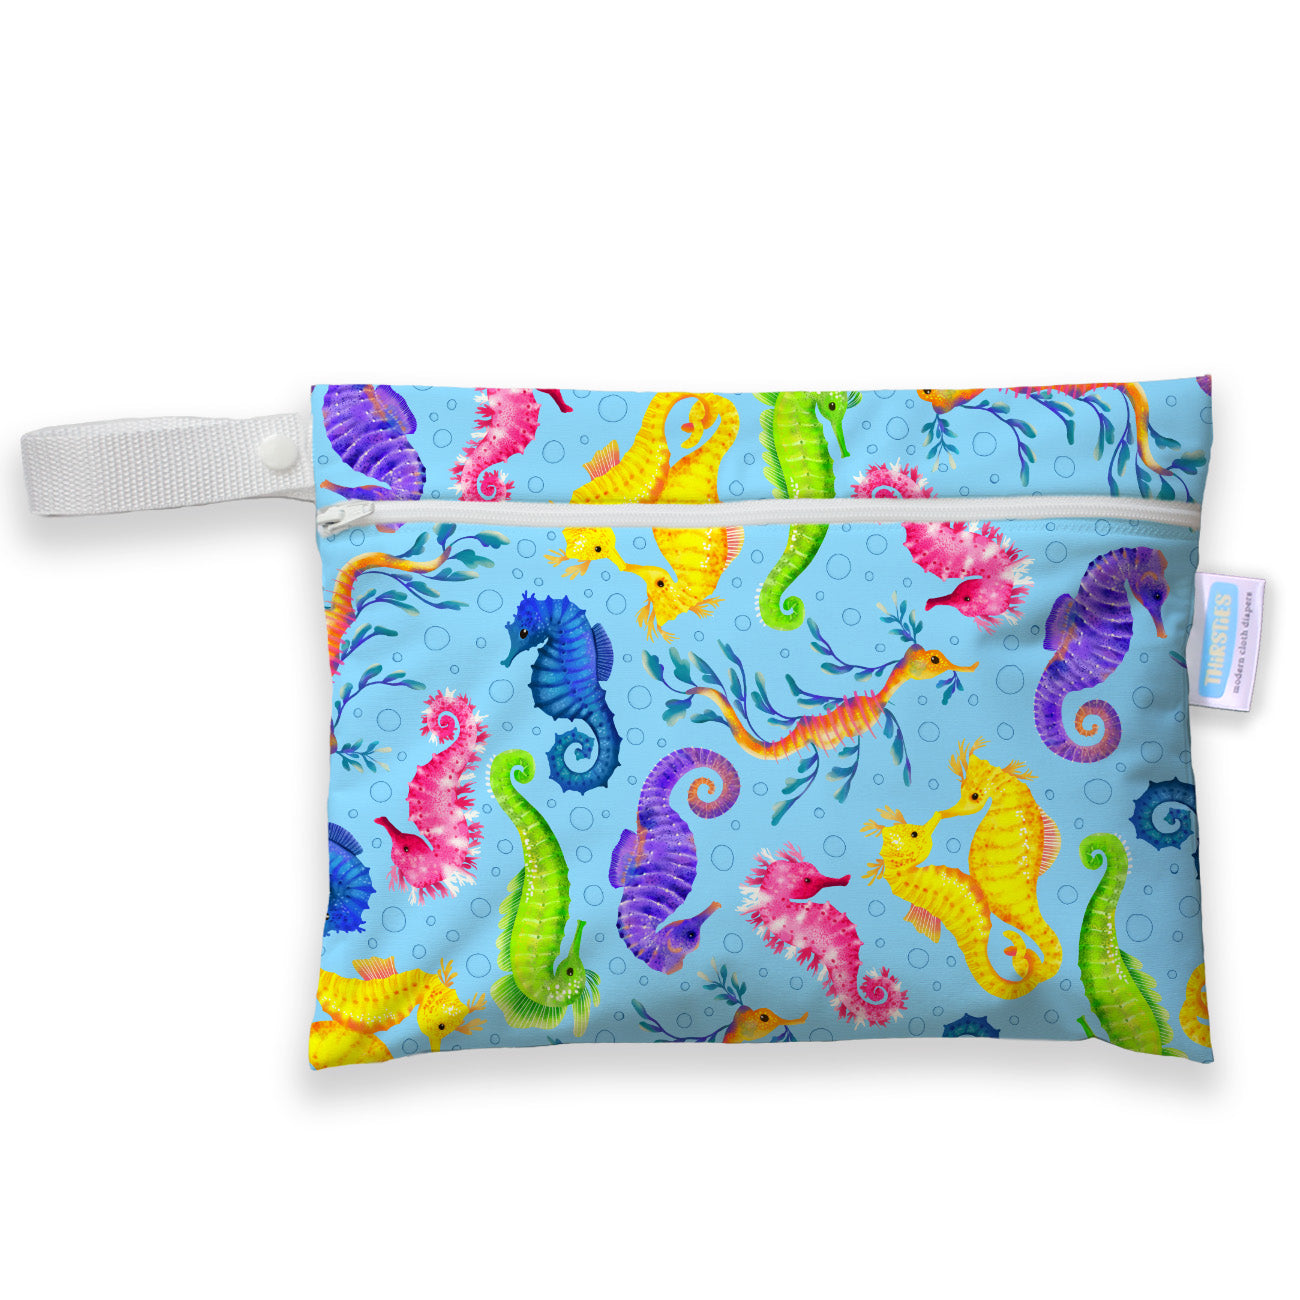 Image of Thirsties Mini Wet Bag in Hold Your Seahorses